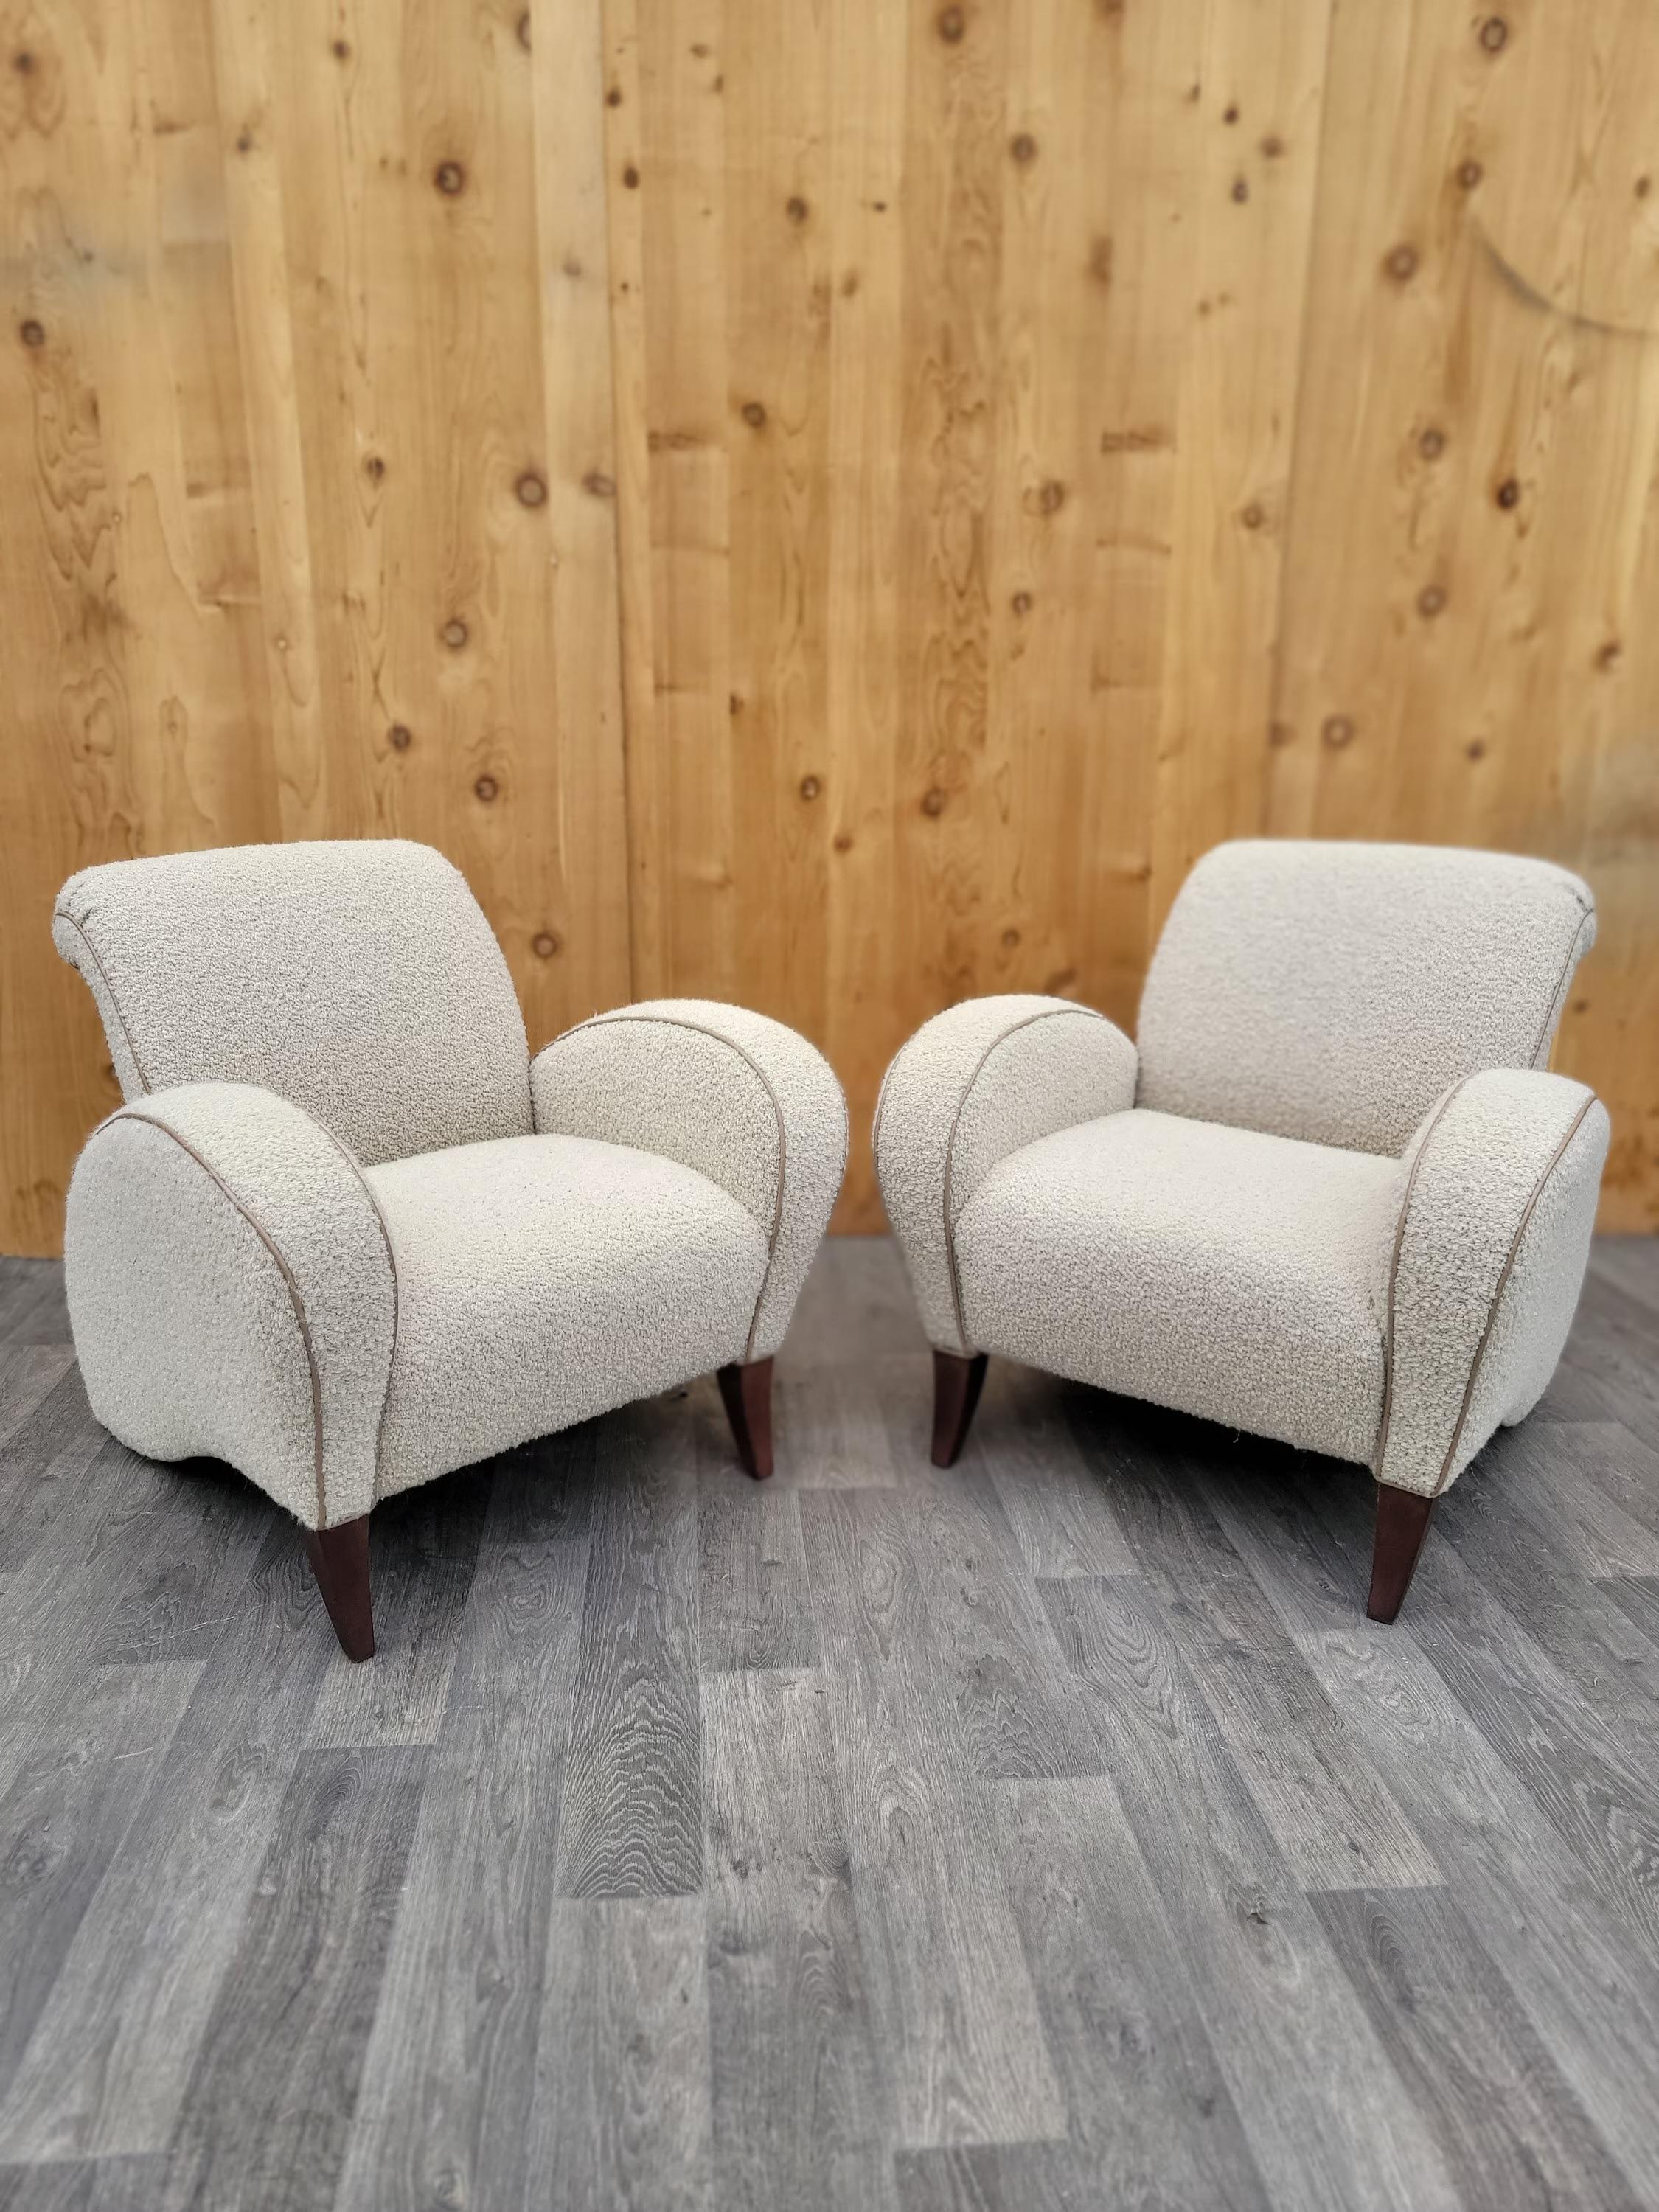 Vintage Italian Art Deco Club Chairs Newly Upholstered In Sheeps-Wool Boucle with Italian Leather Trim Finish - Pair 

This pair of Vintage Italian Art Deco Club Chairs, attributed to Jindřich Halabala, is truly exceptional. The curved arm and